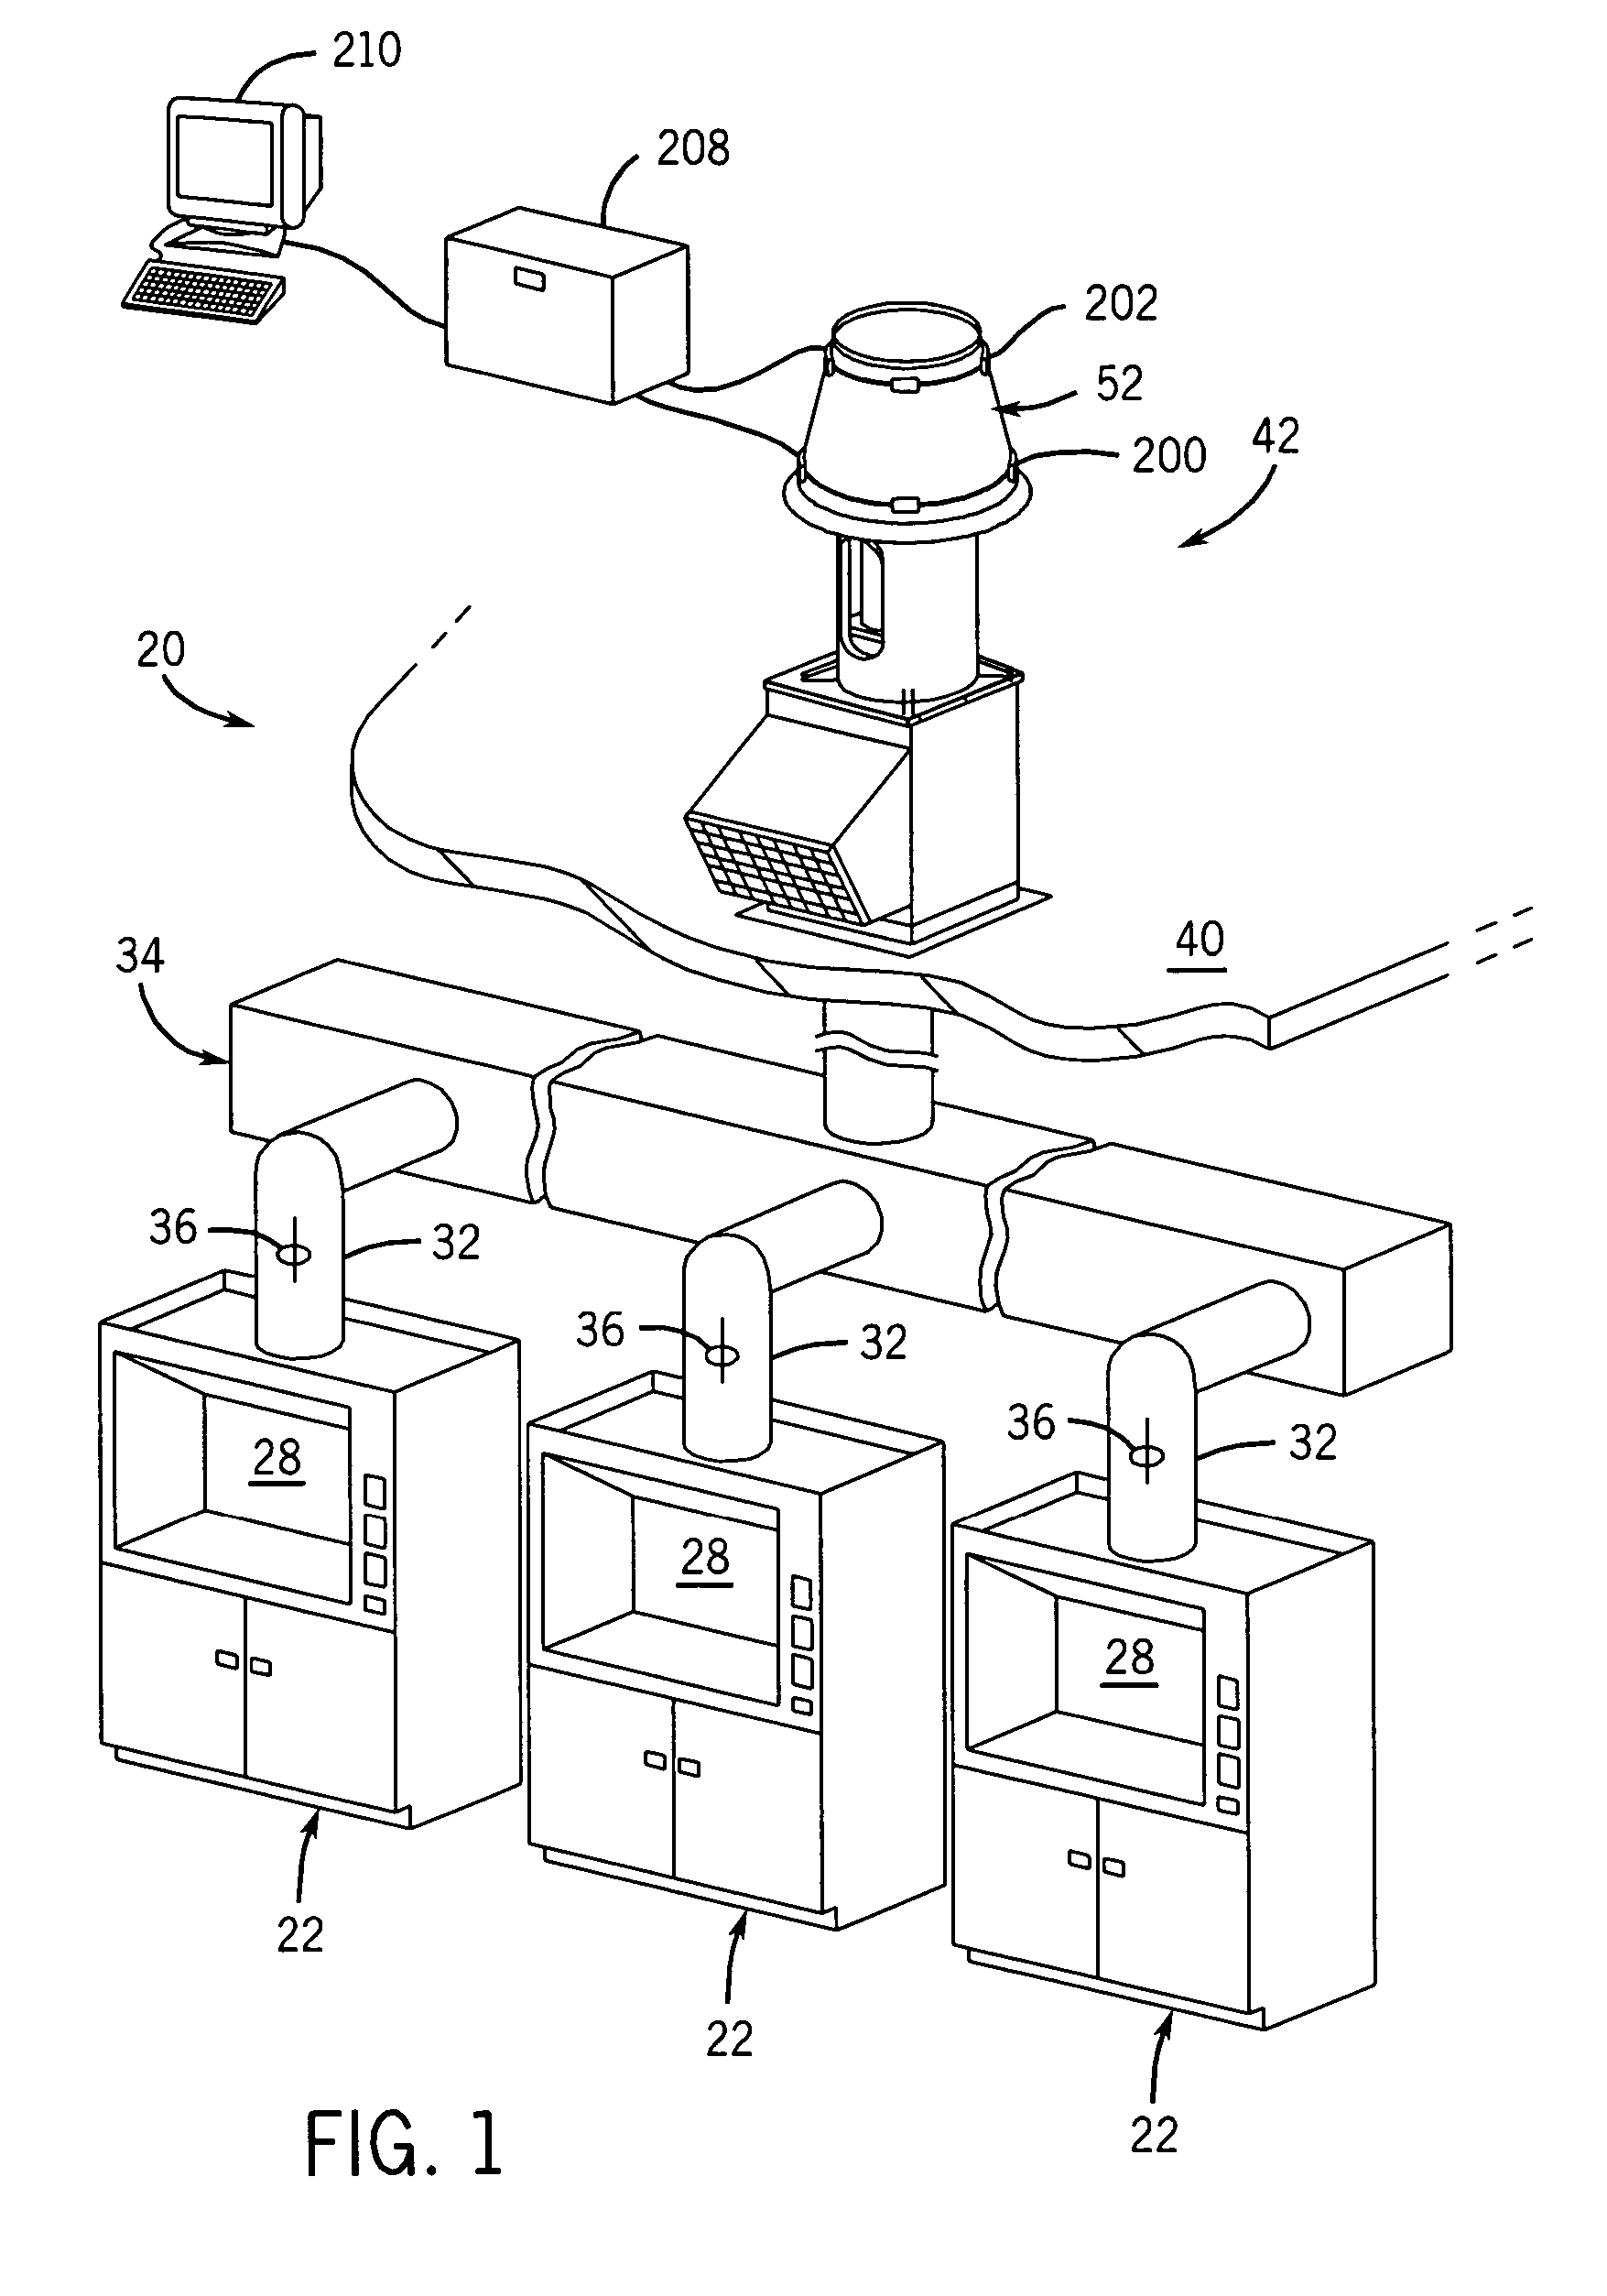 Induced flow fan with outlet flow measurement